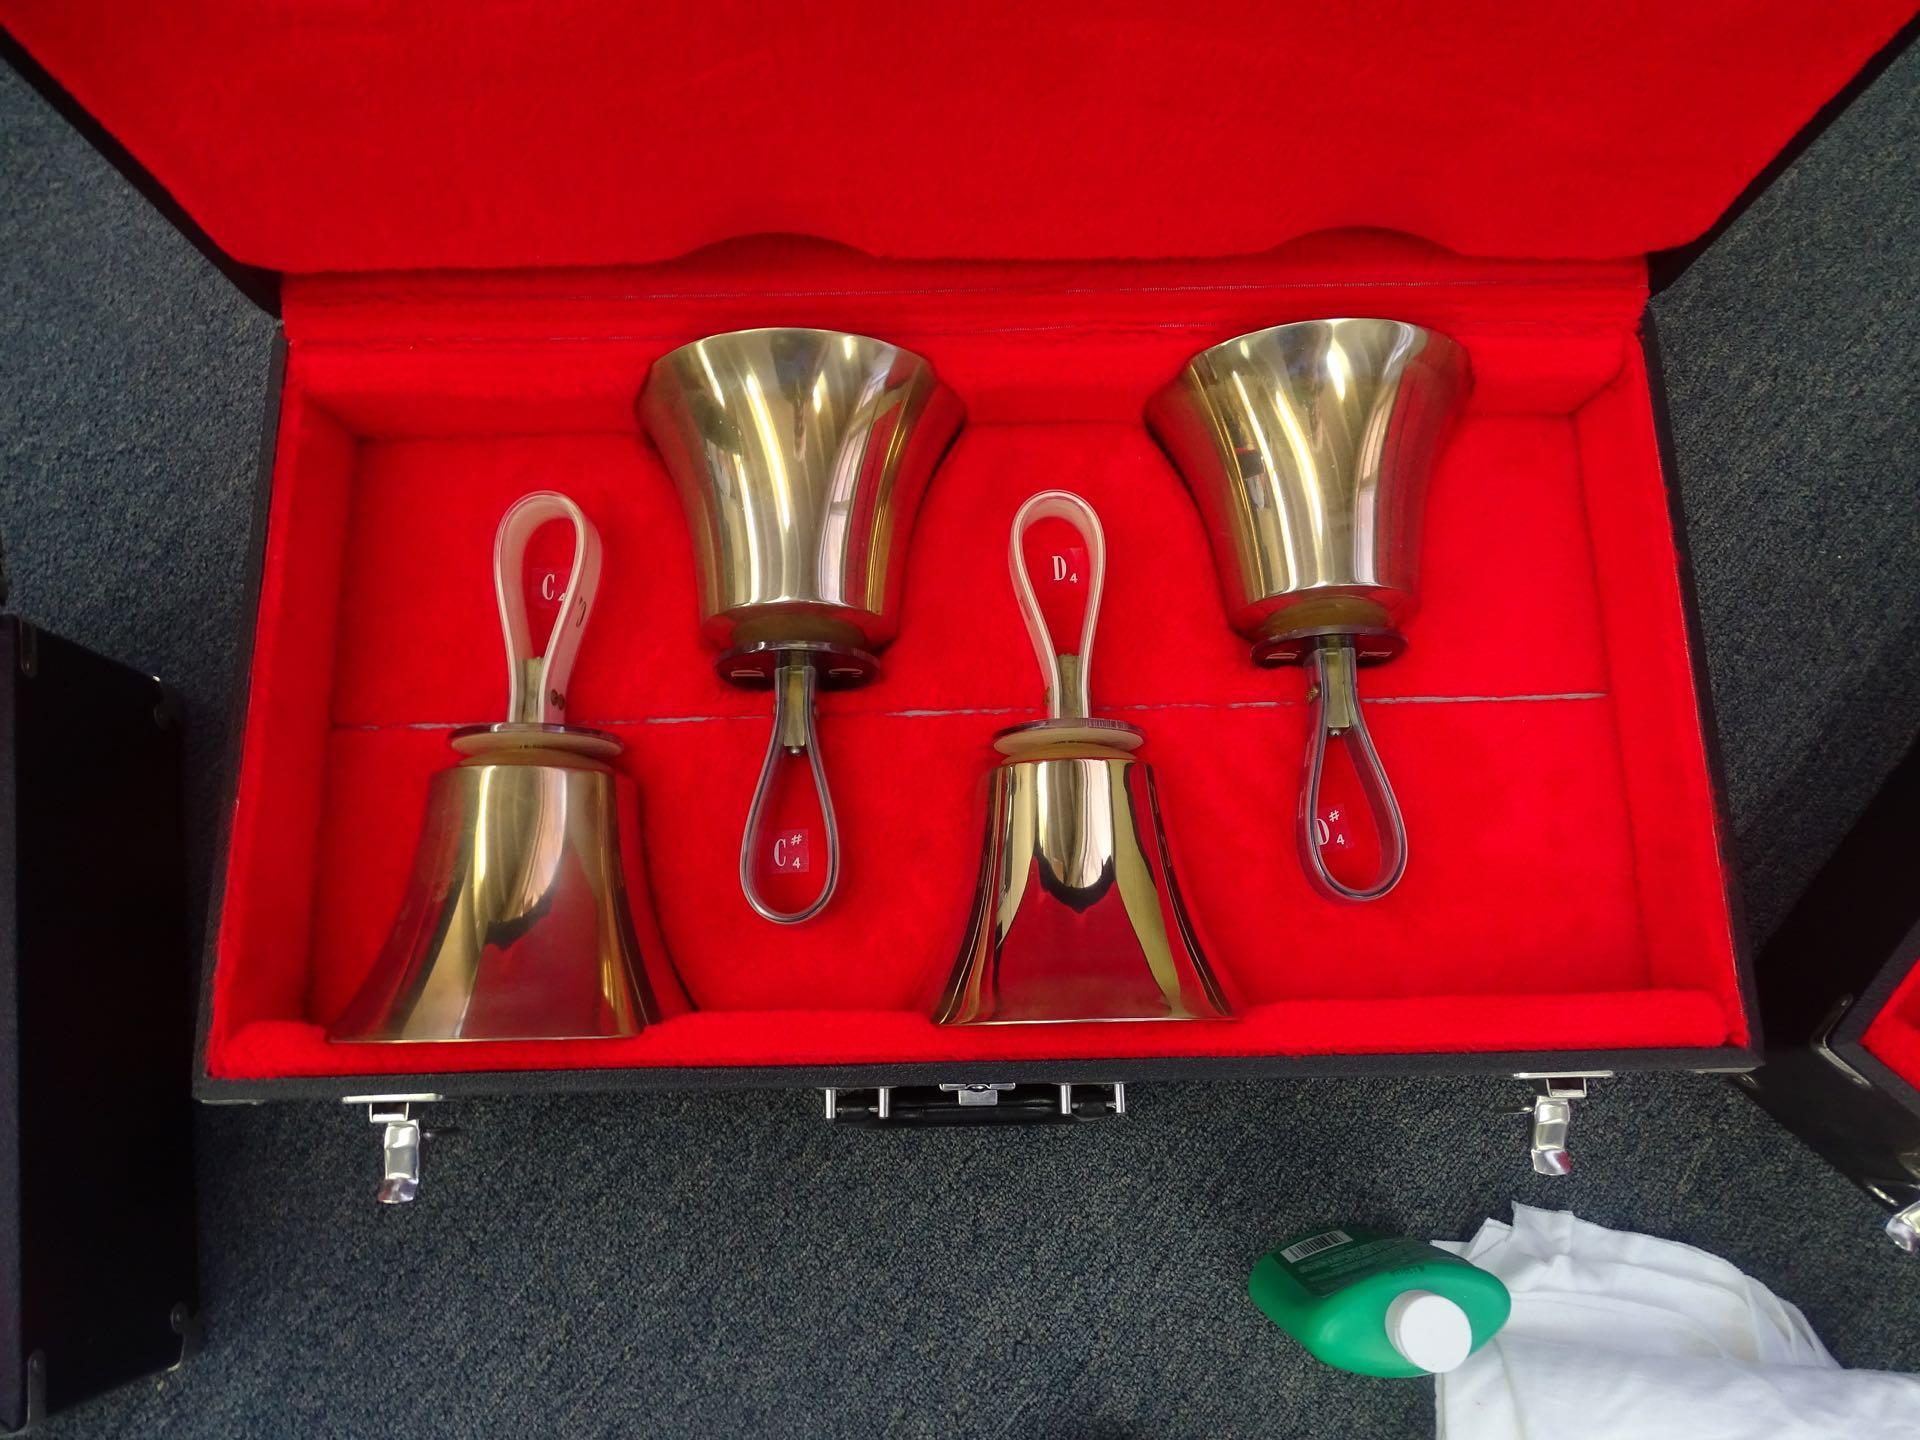 MALMARK 3 OCTAVE HAND BELL SET W/CASES & FOLDING TABLES, PADS, FOLD OUT 3 RING MUSIC HOLDER